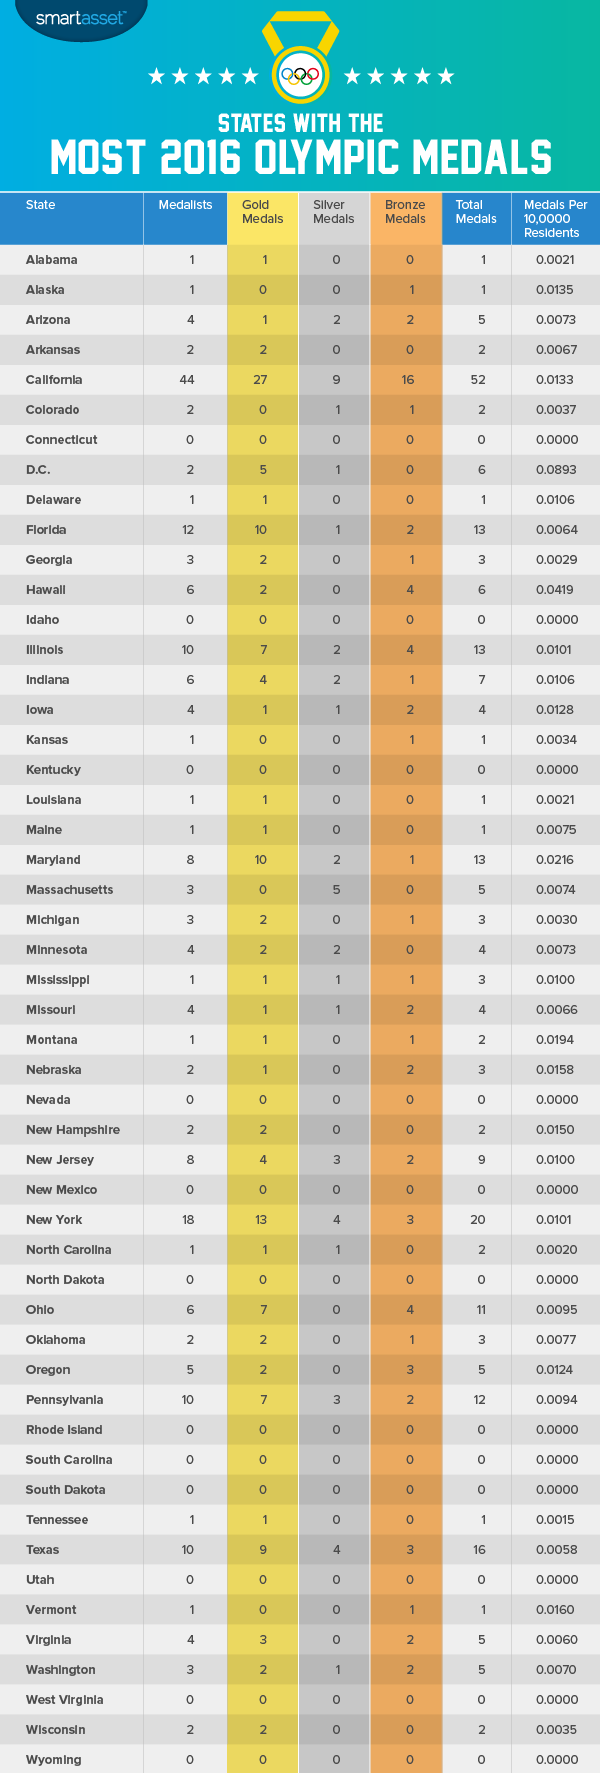 States with the Most 2016 Olympic Medals